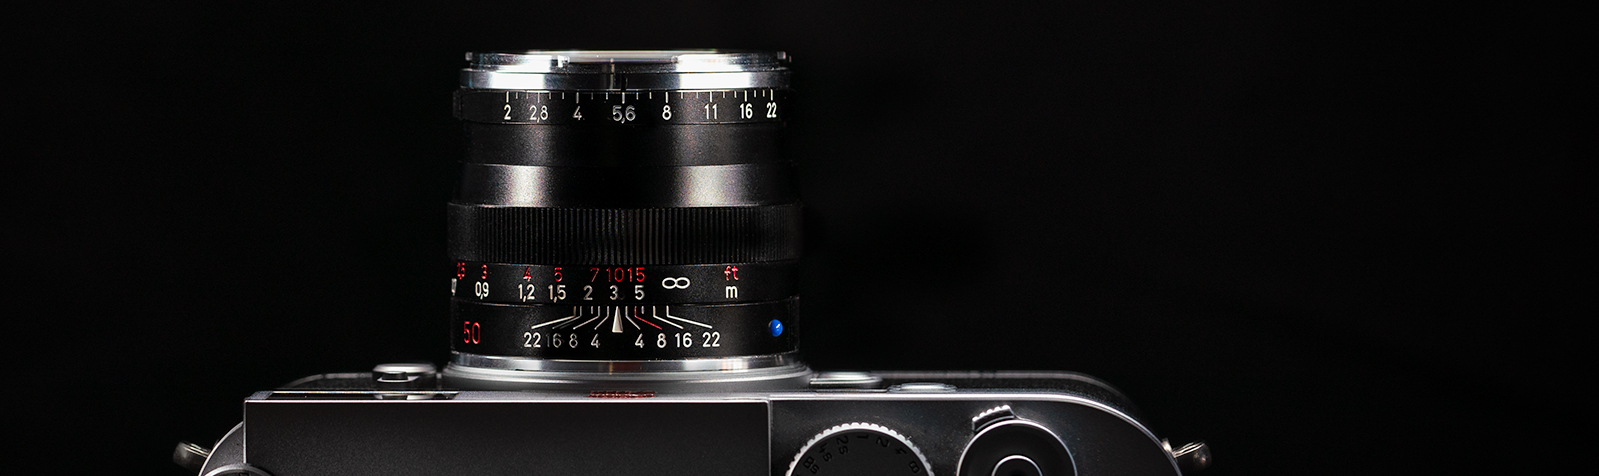 Zeiss ZM Planar 50mm f/2 Review – Leica Lenses for Normal People